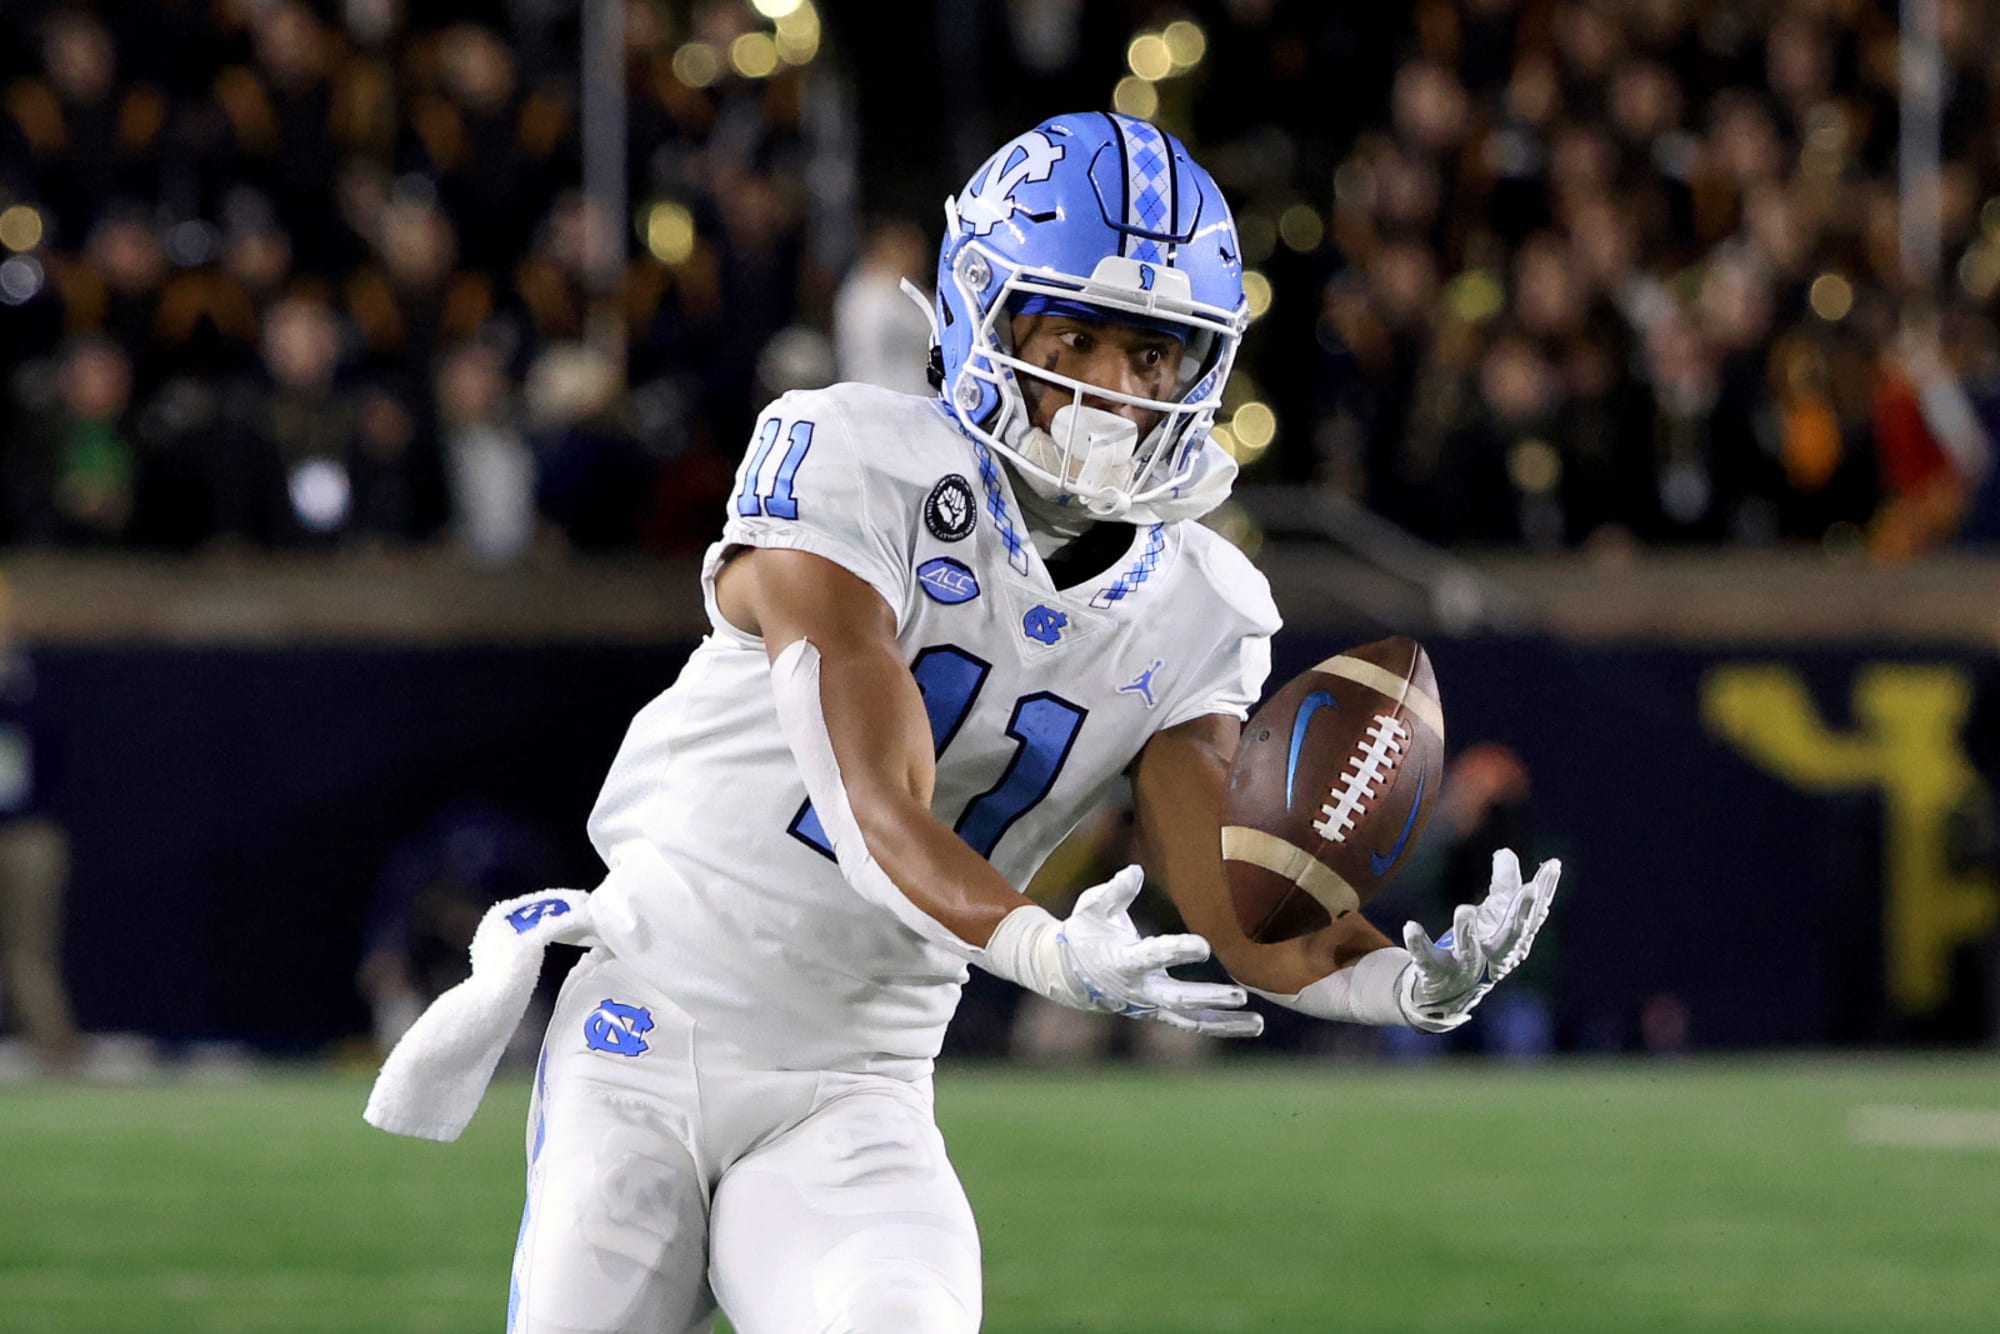 UNC Football: WR Josh Downs announces his return to lineup this weekend